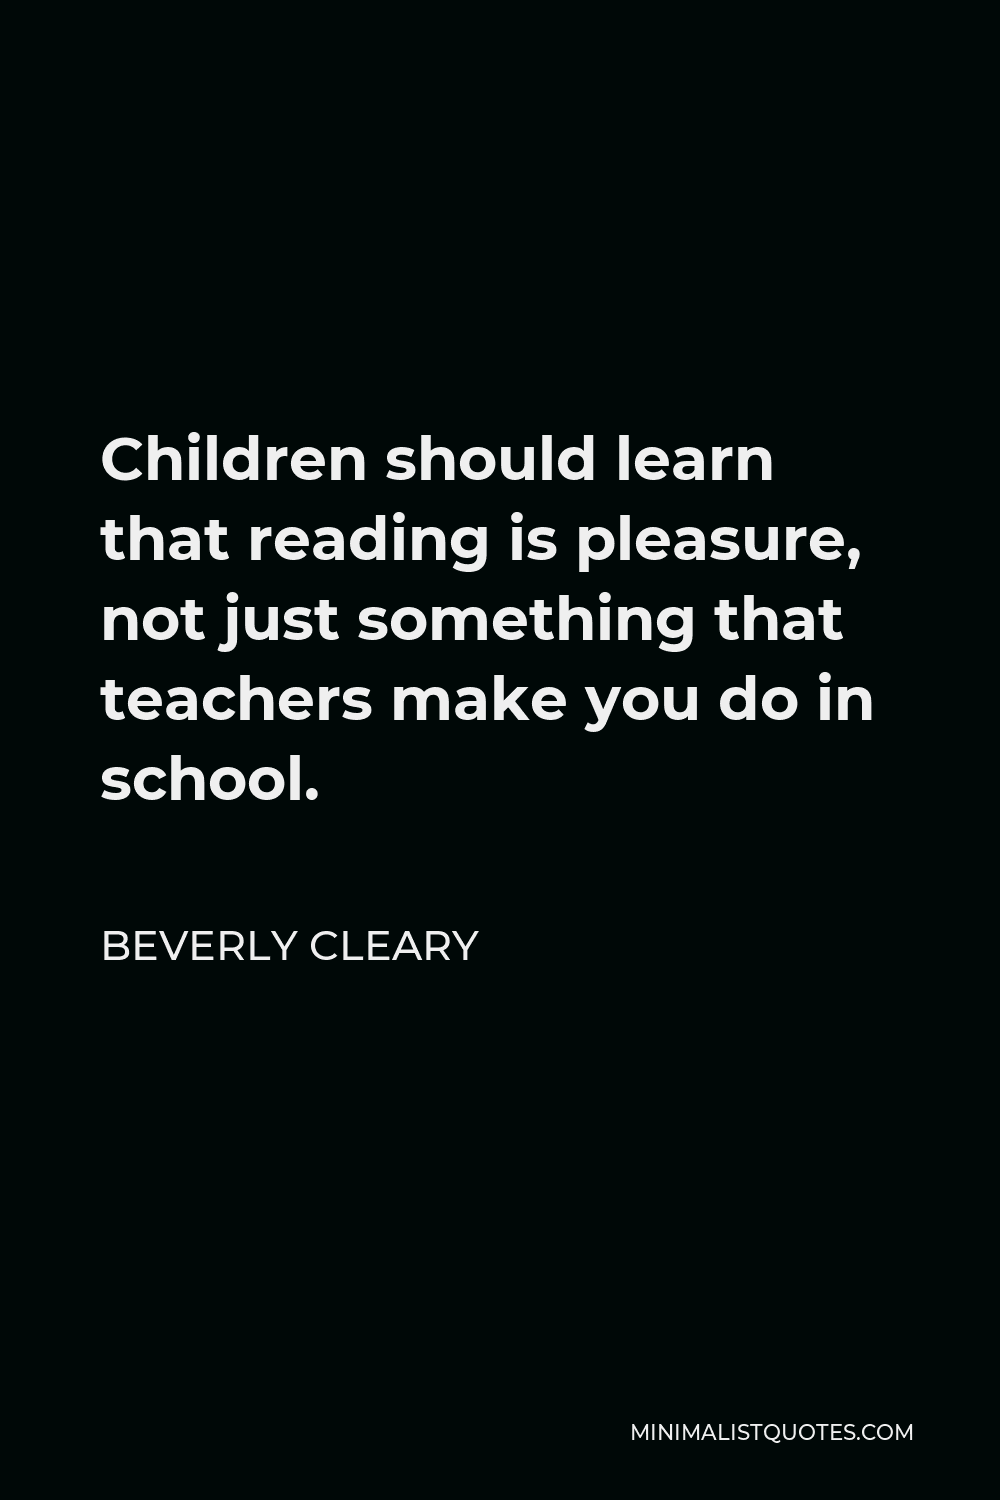 Beverly Cleary Quote - Children should learn that reading is pleasure, not just something that teachers make you do in school.